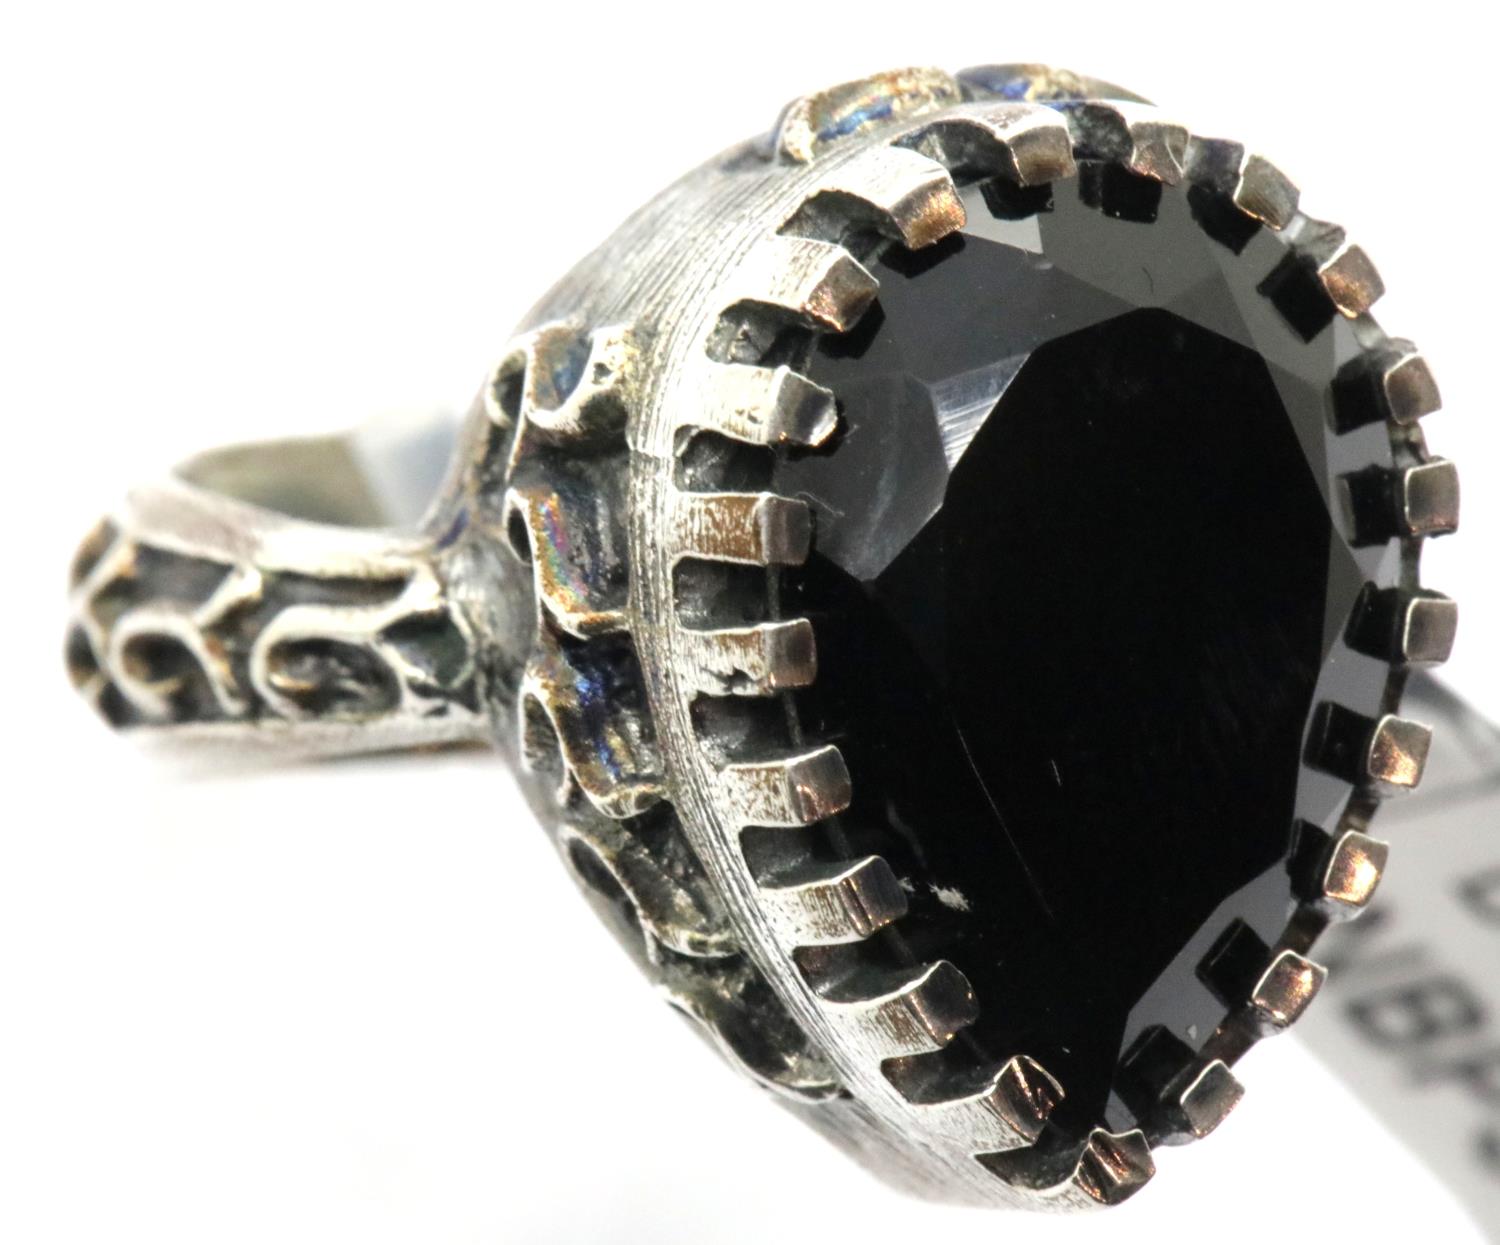 Heavy pewter black onyx set ring. Size P, 7.9g. P&P Group 1 (£14+VAT for the first lot and £1+VAT